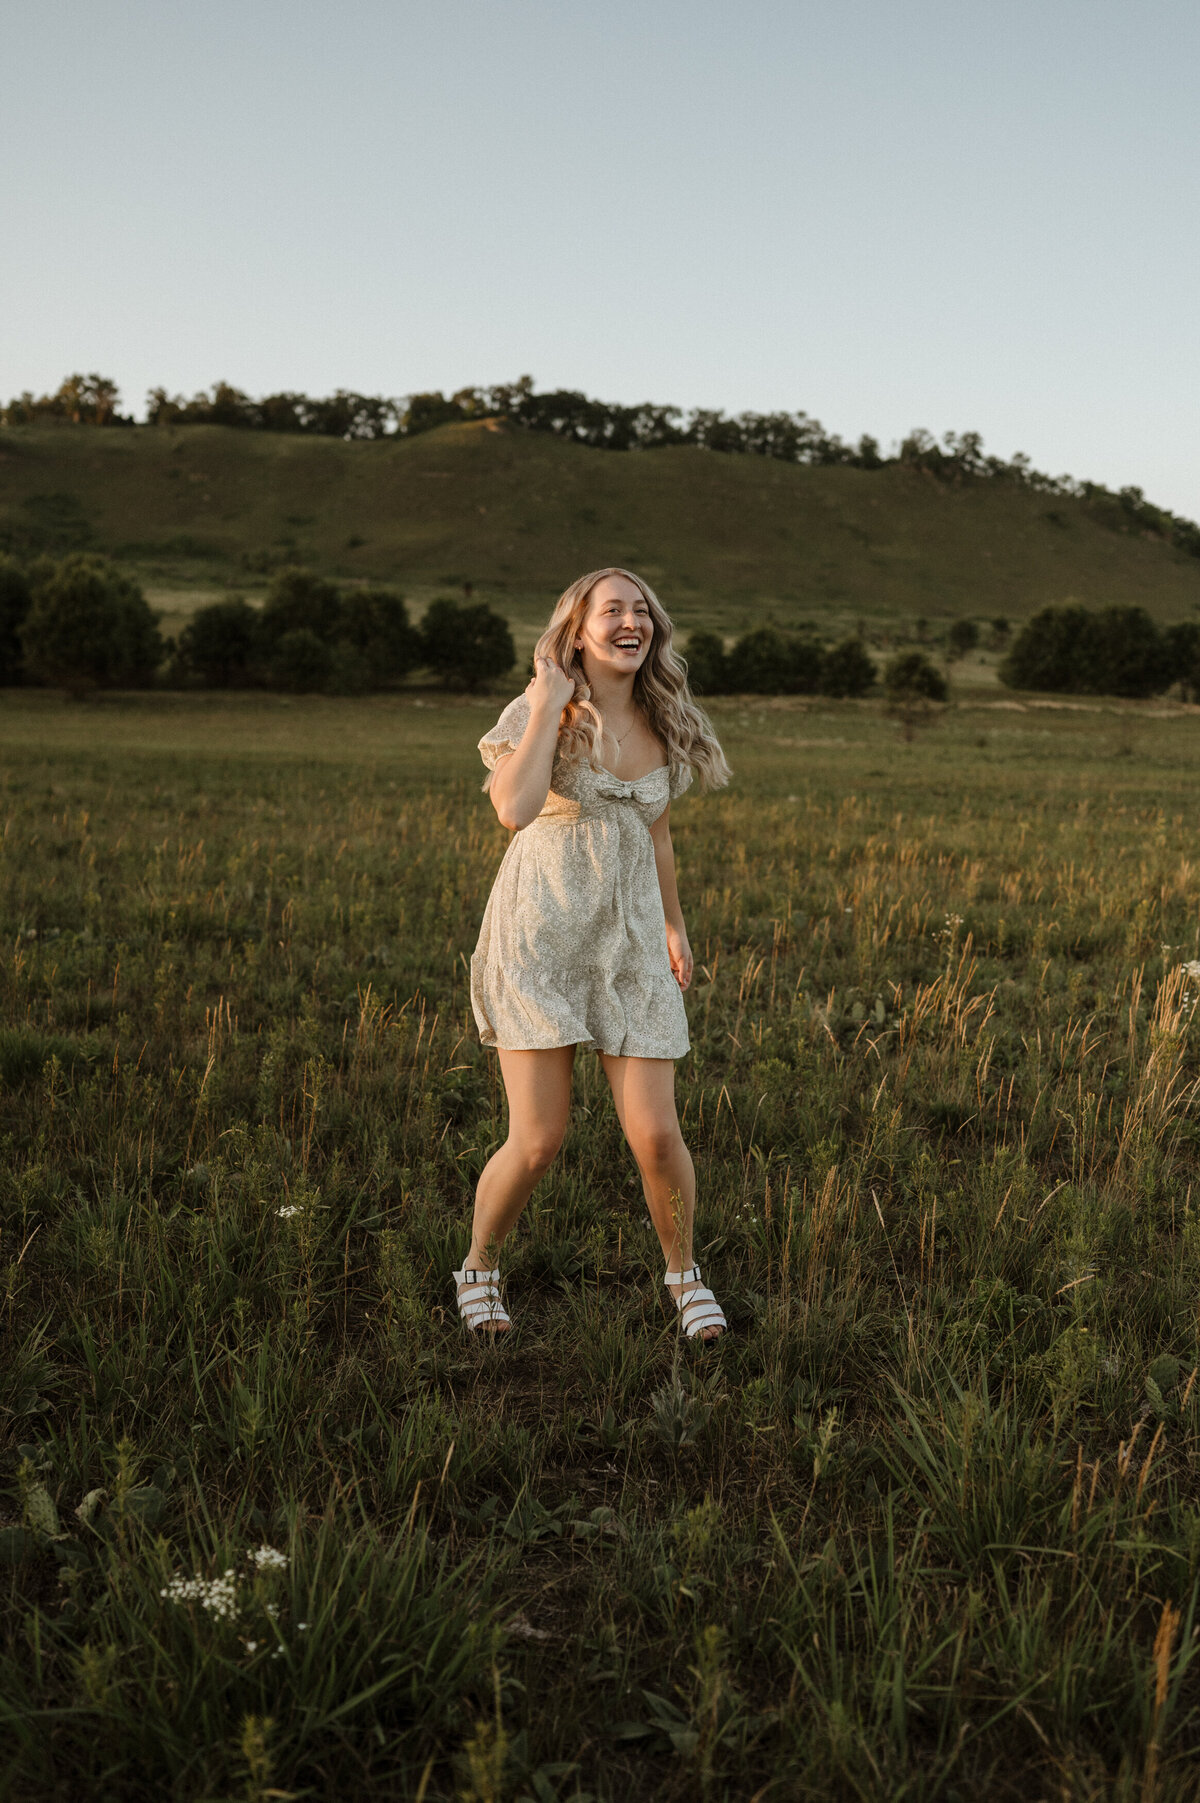 Girl dancing and laughing in field